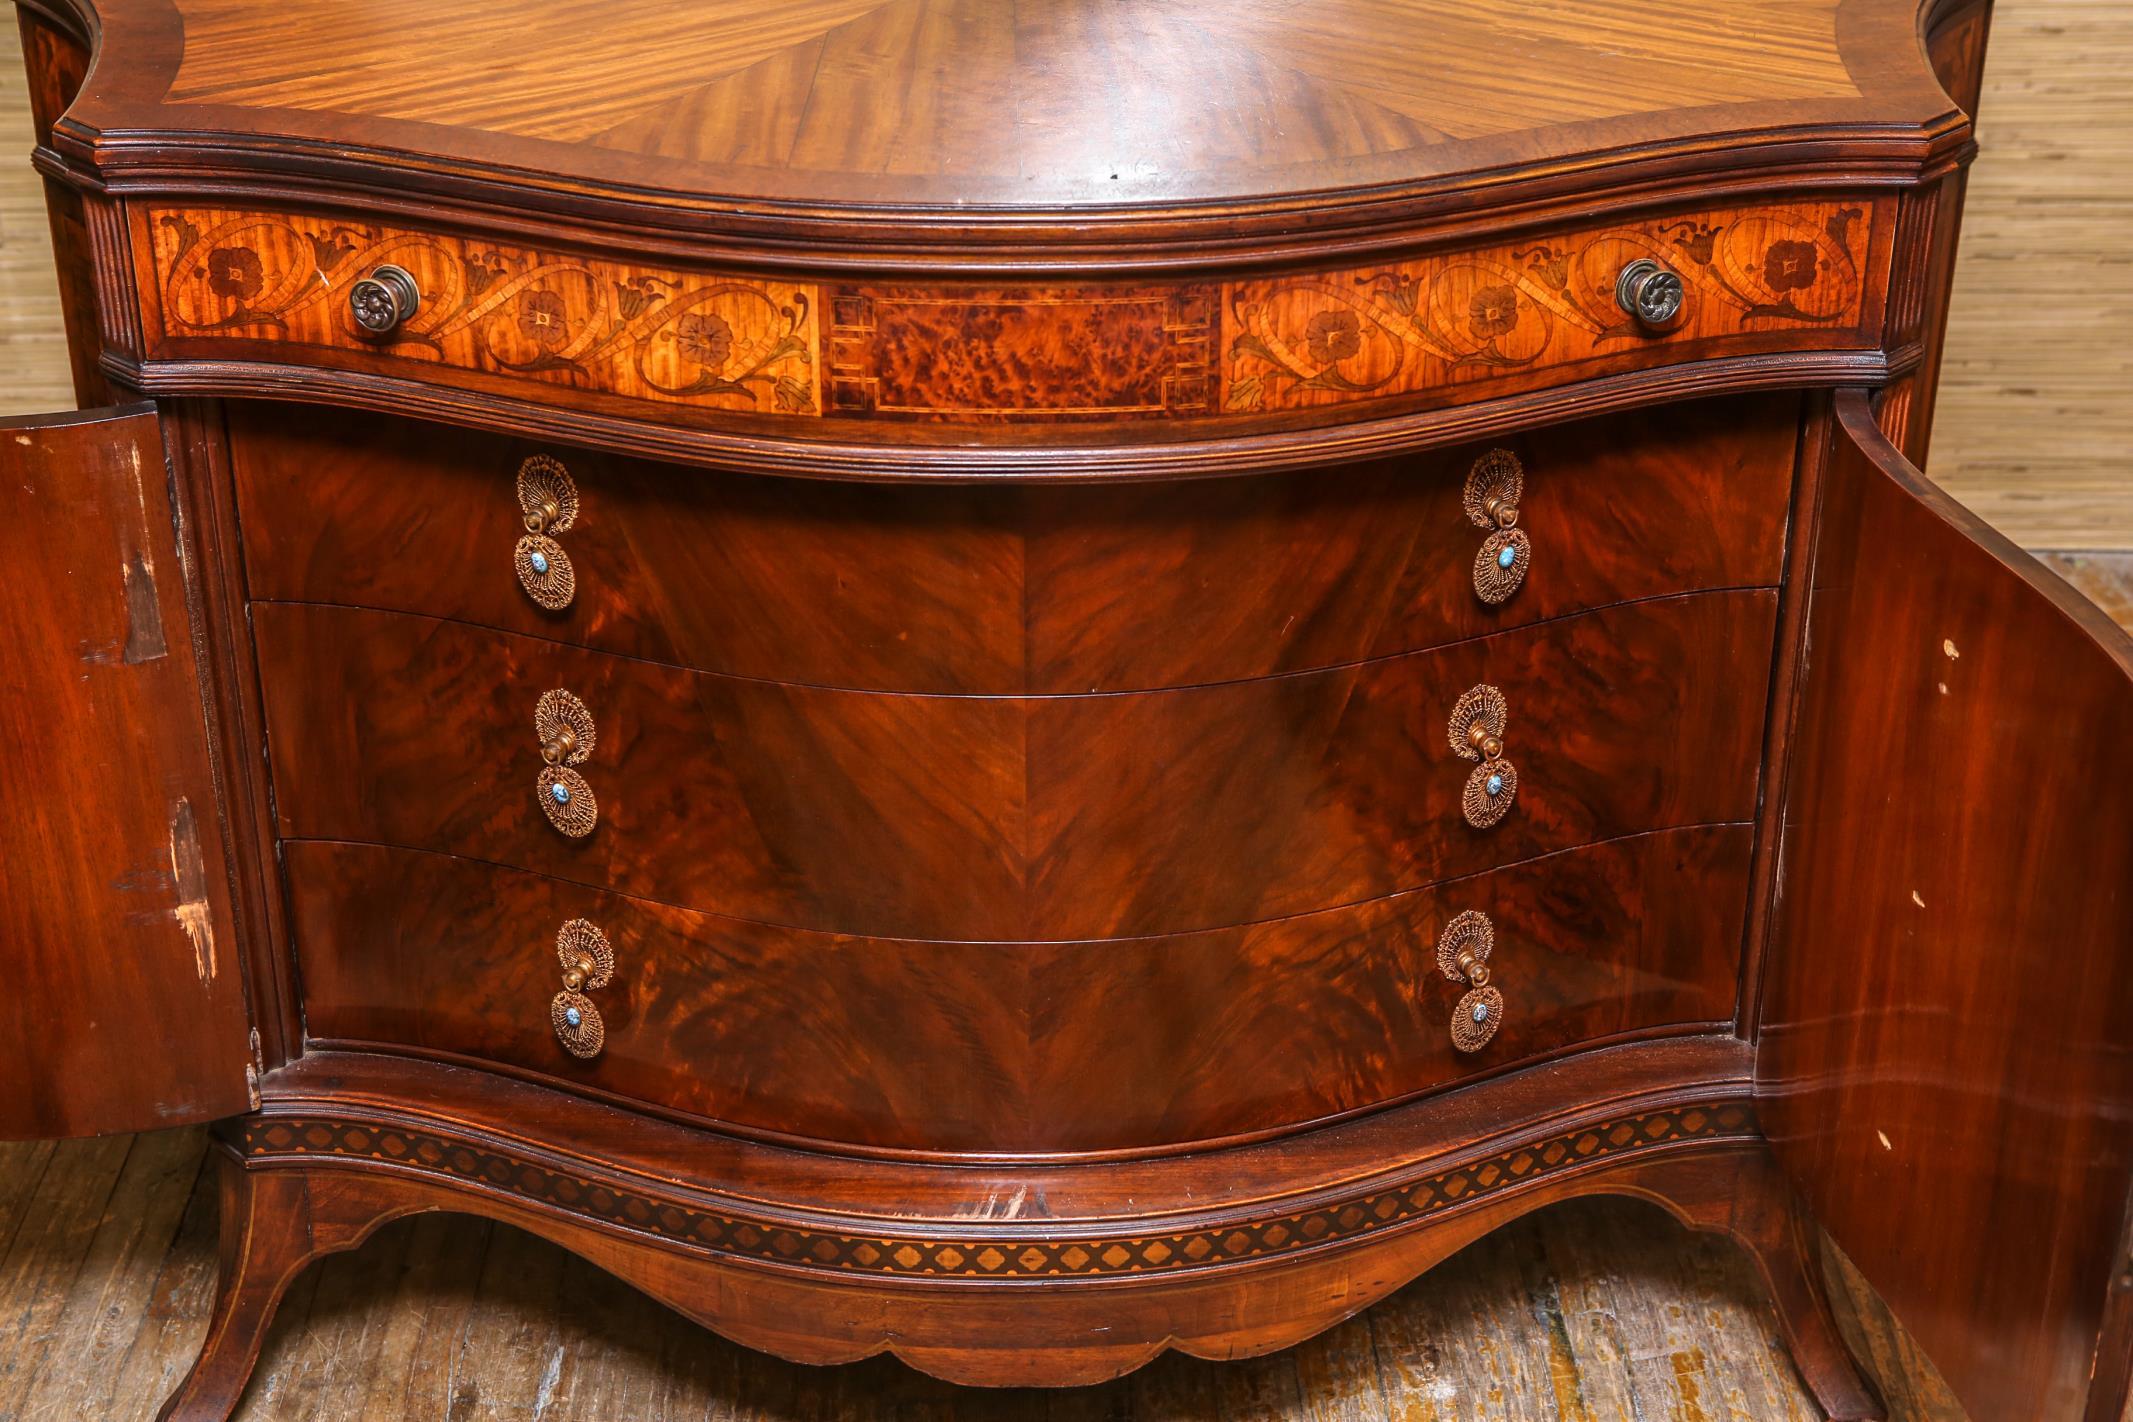 20th Century Italian Neoclassical Manner Marquetry Serpentine Commode in Mahogany & Fruitwood